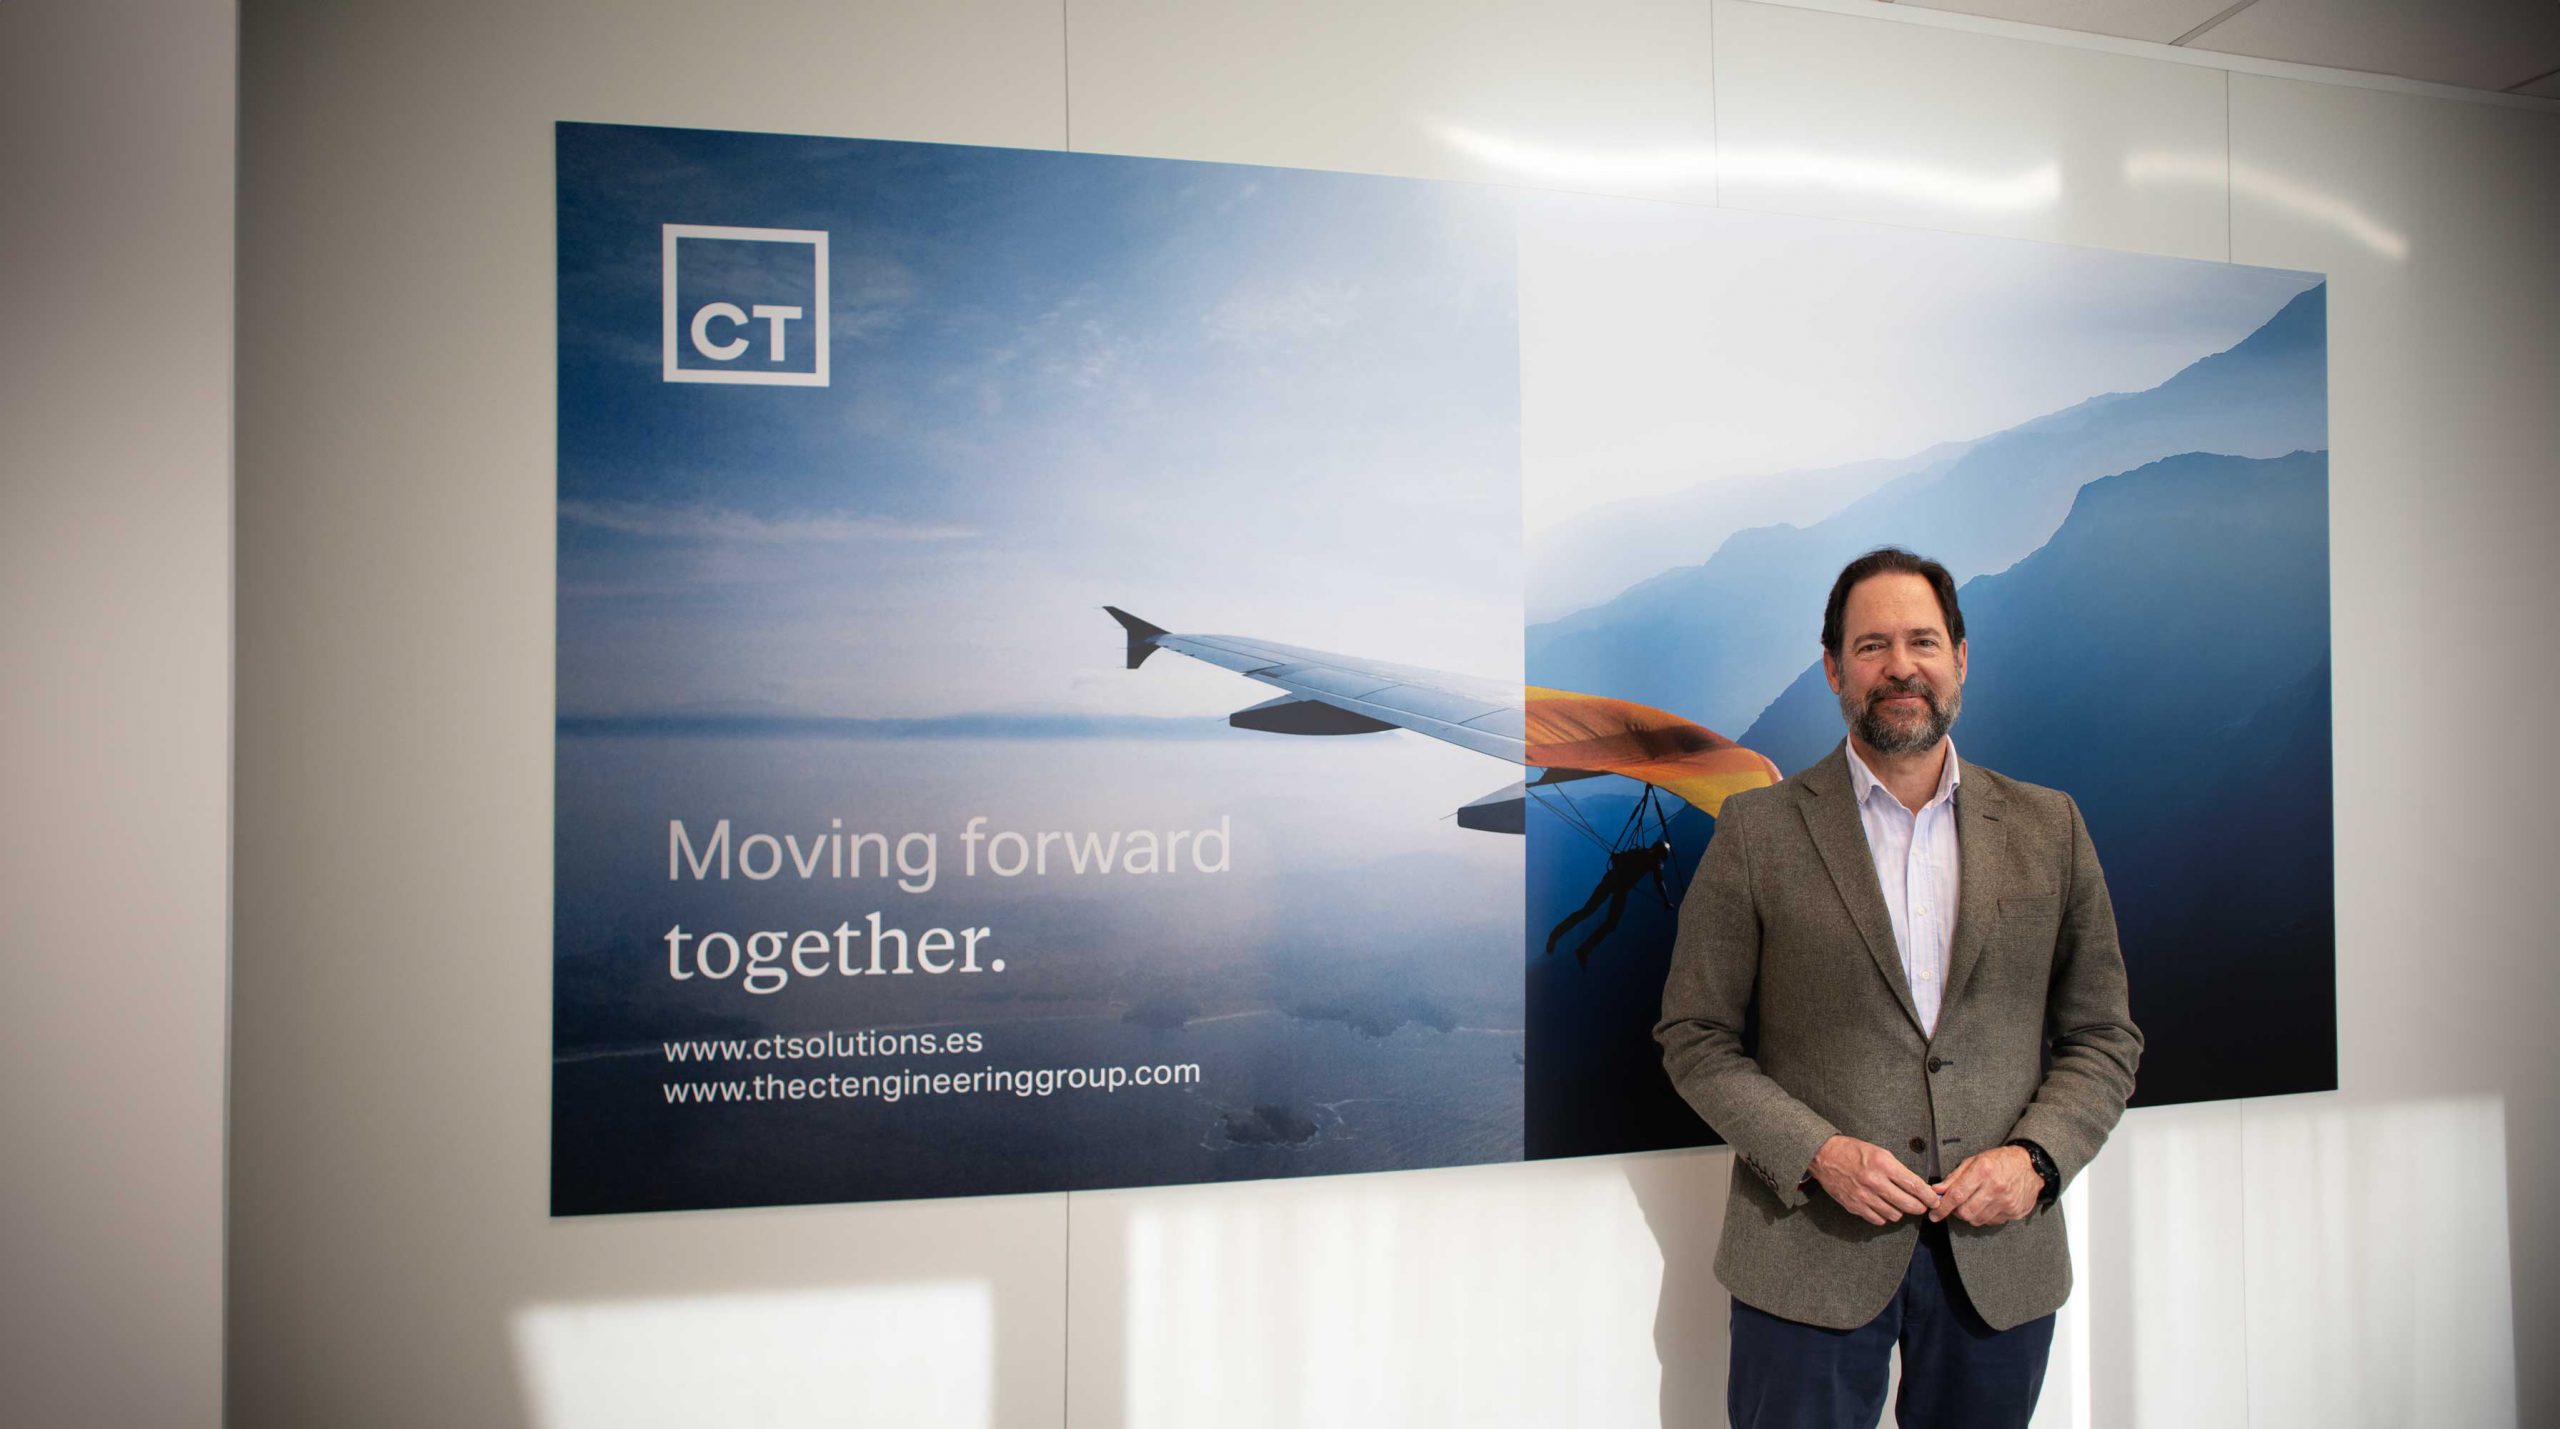 CT appoints Guillermo Galbete as General Manager of CT Solutions.